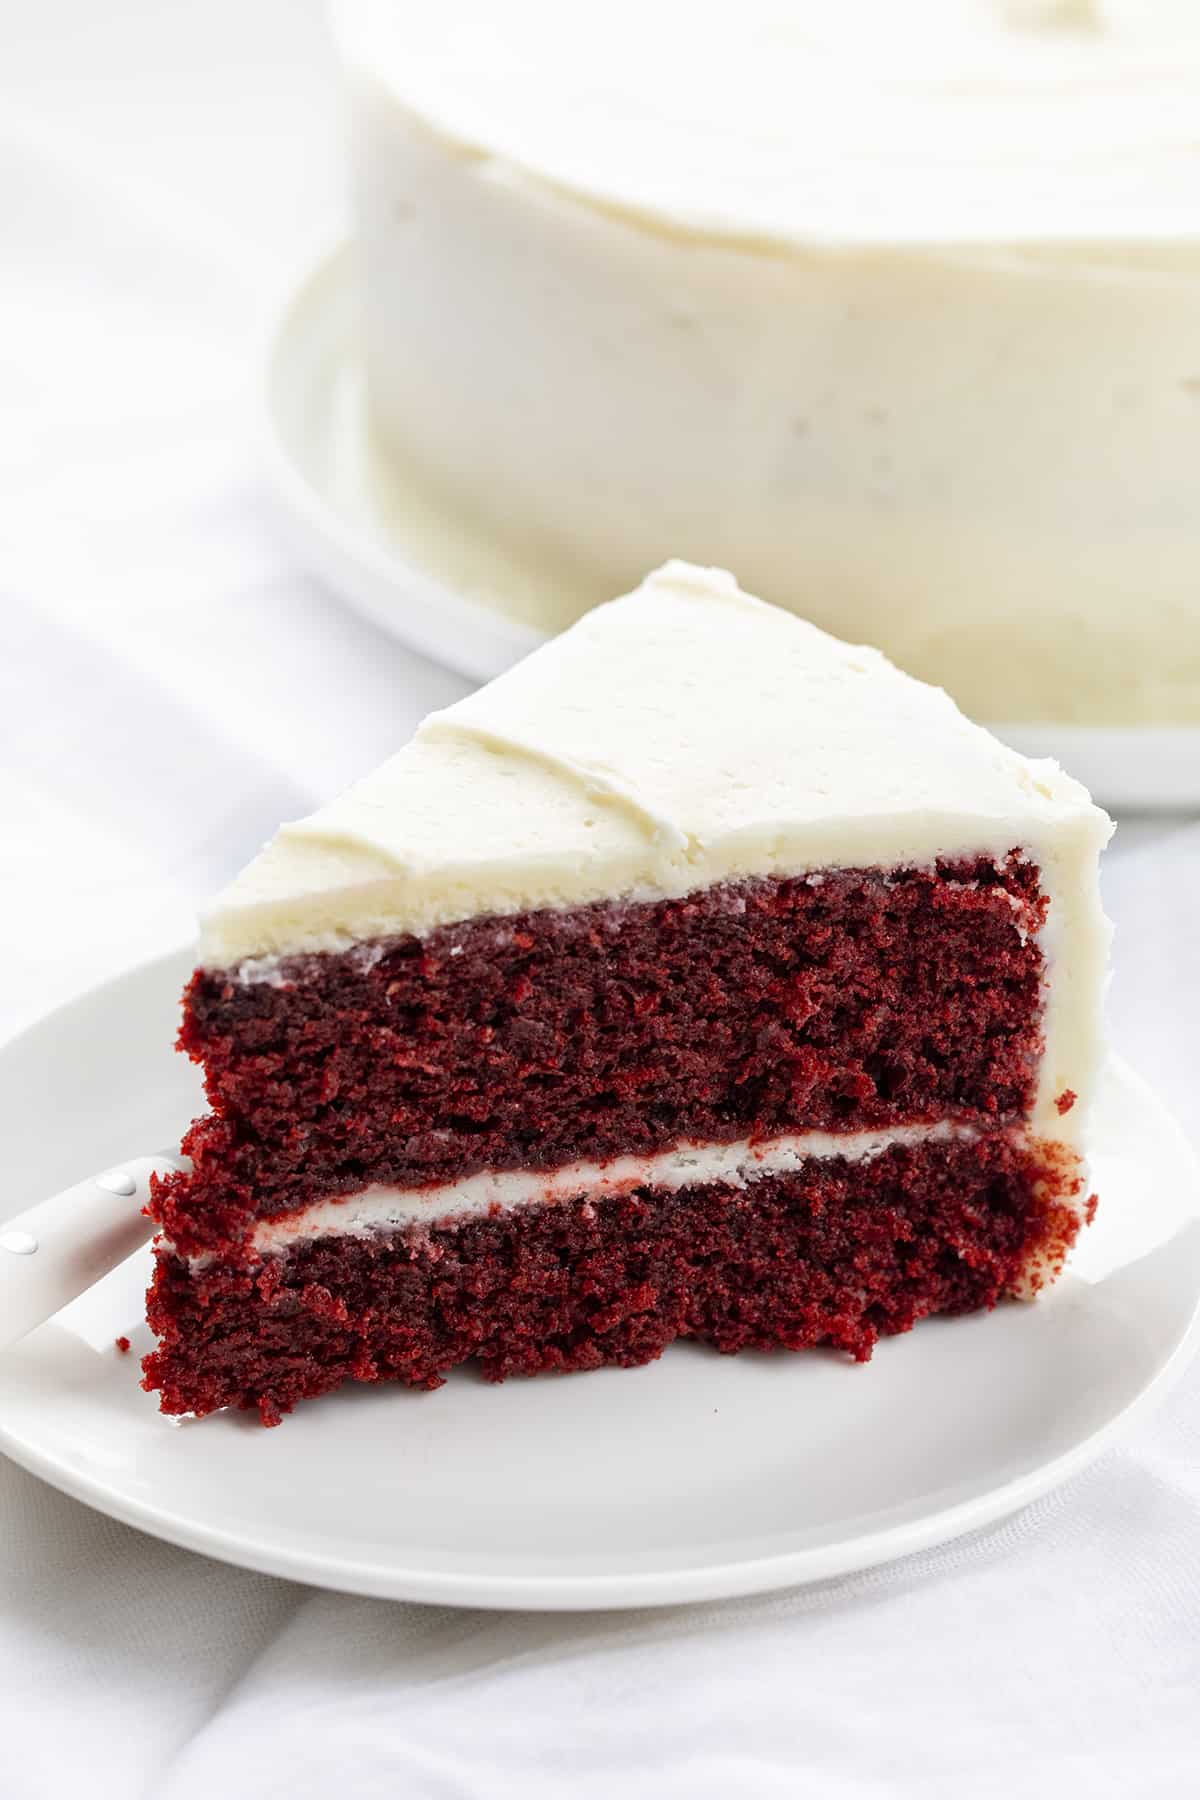 Piece of Red velvet cake on a plate with the whole cake behind it in the background.